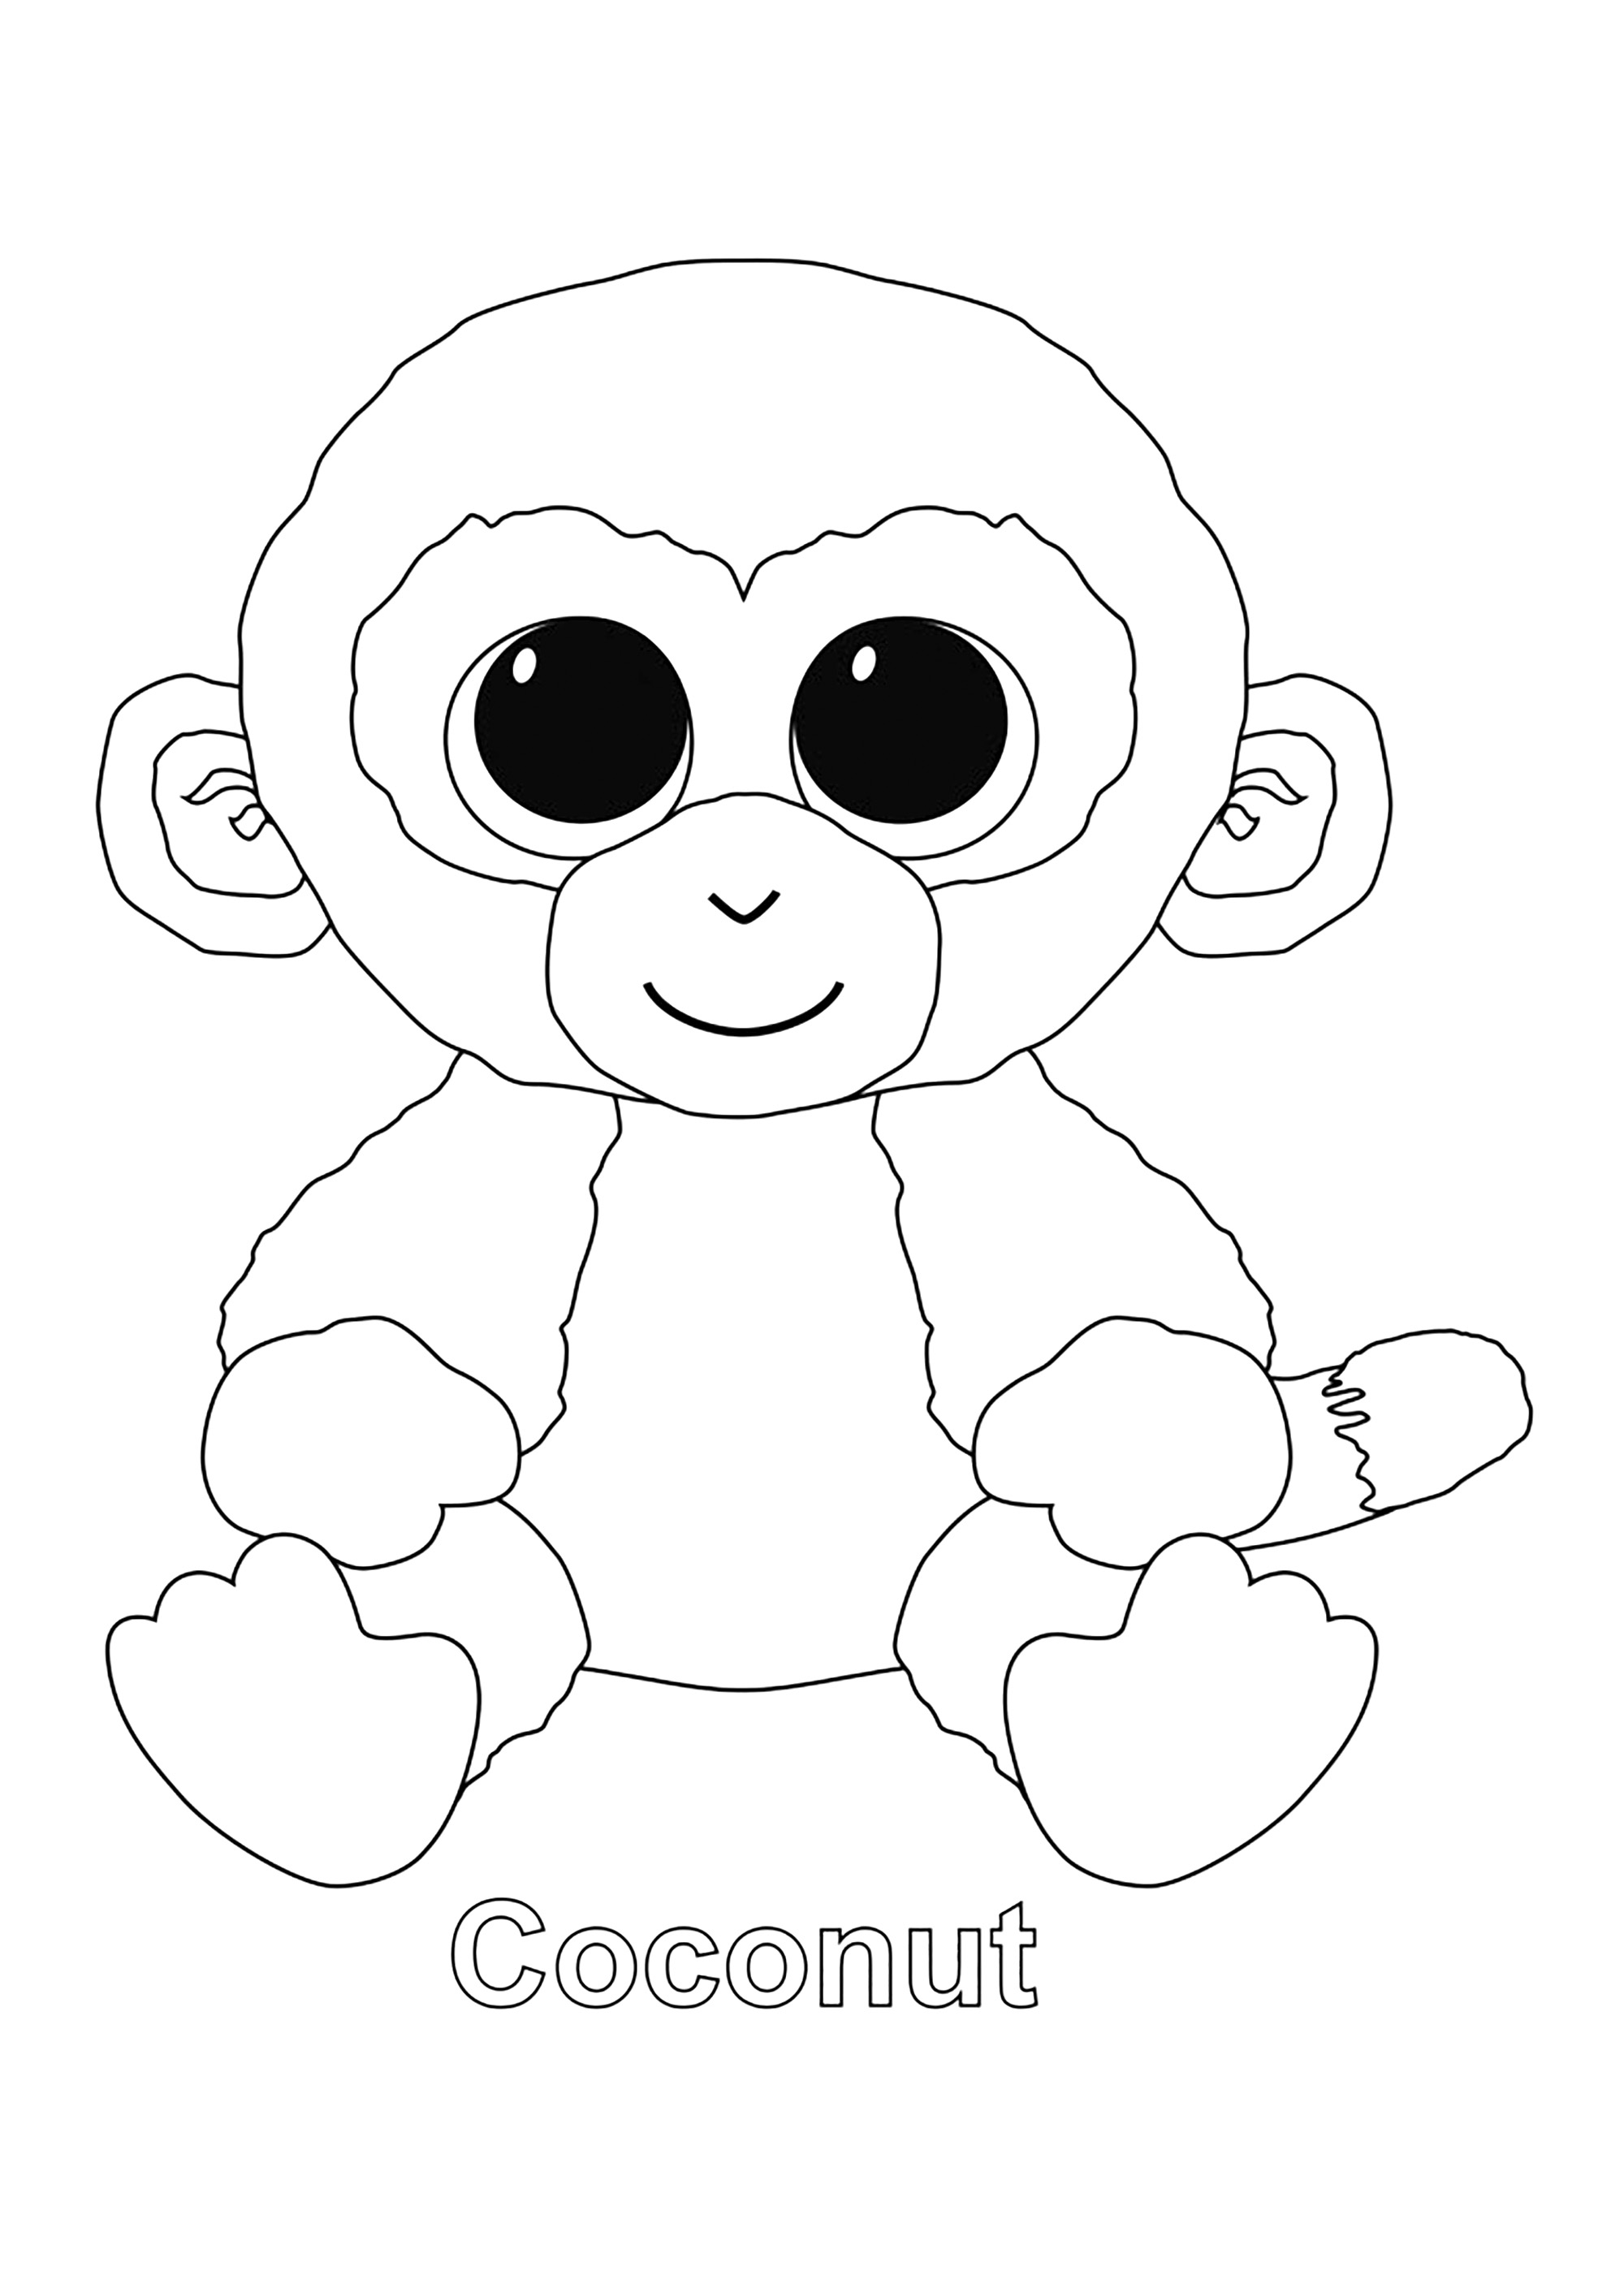 Coconut (Monkey): very simple coloring page